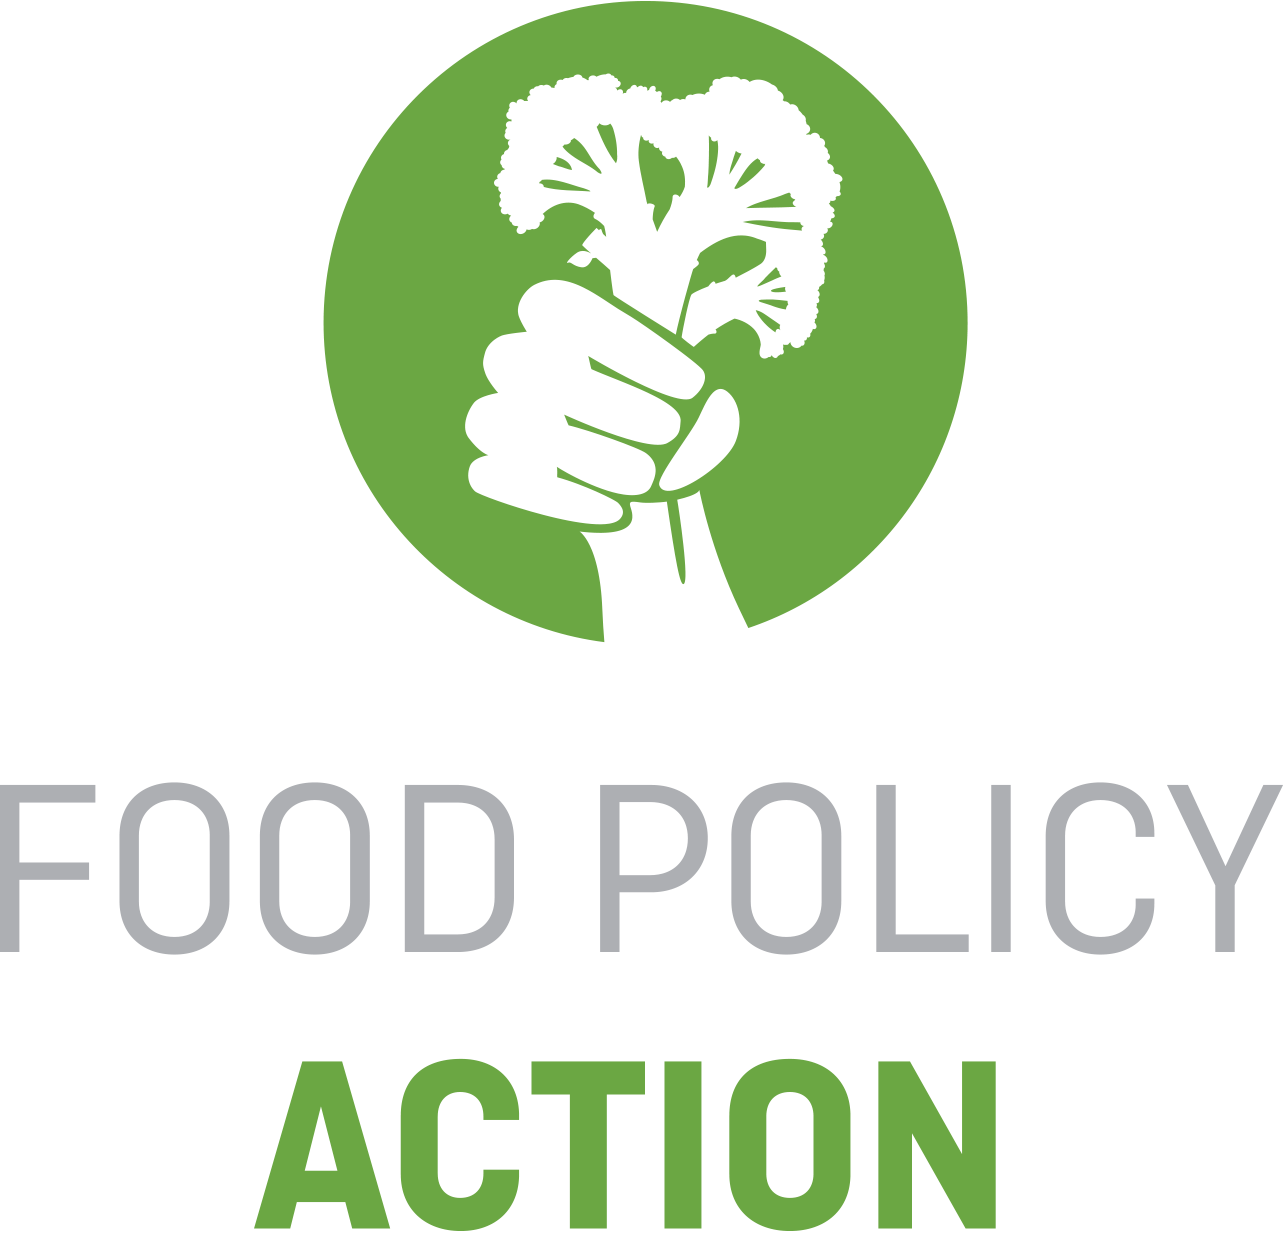 Our Elected Officials Were Graded On Critical Food - Food Policy Action Logo (1283x1233)